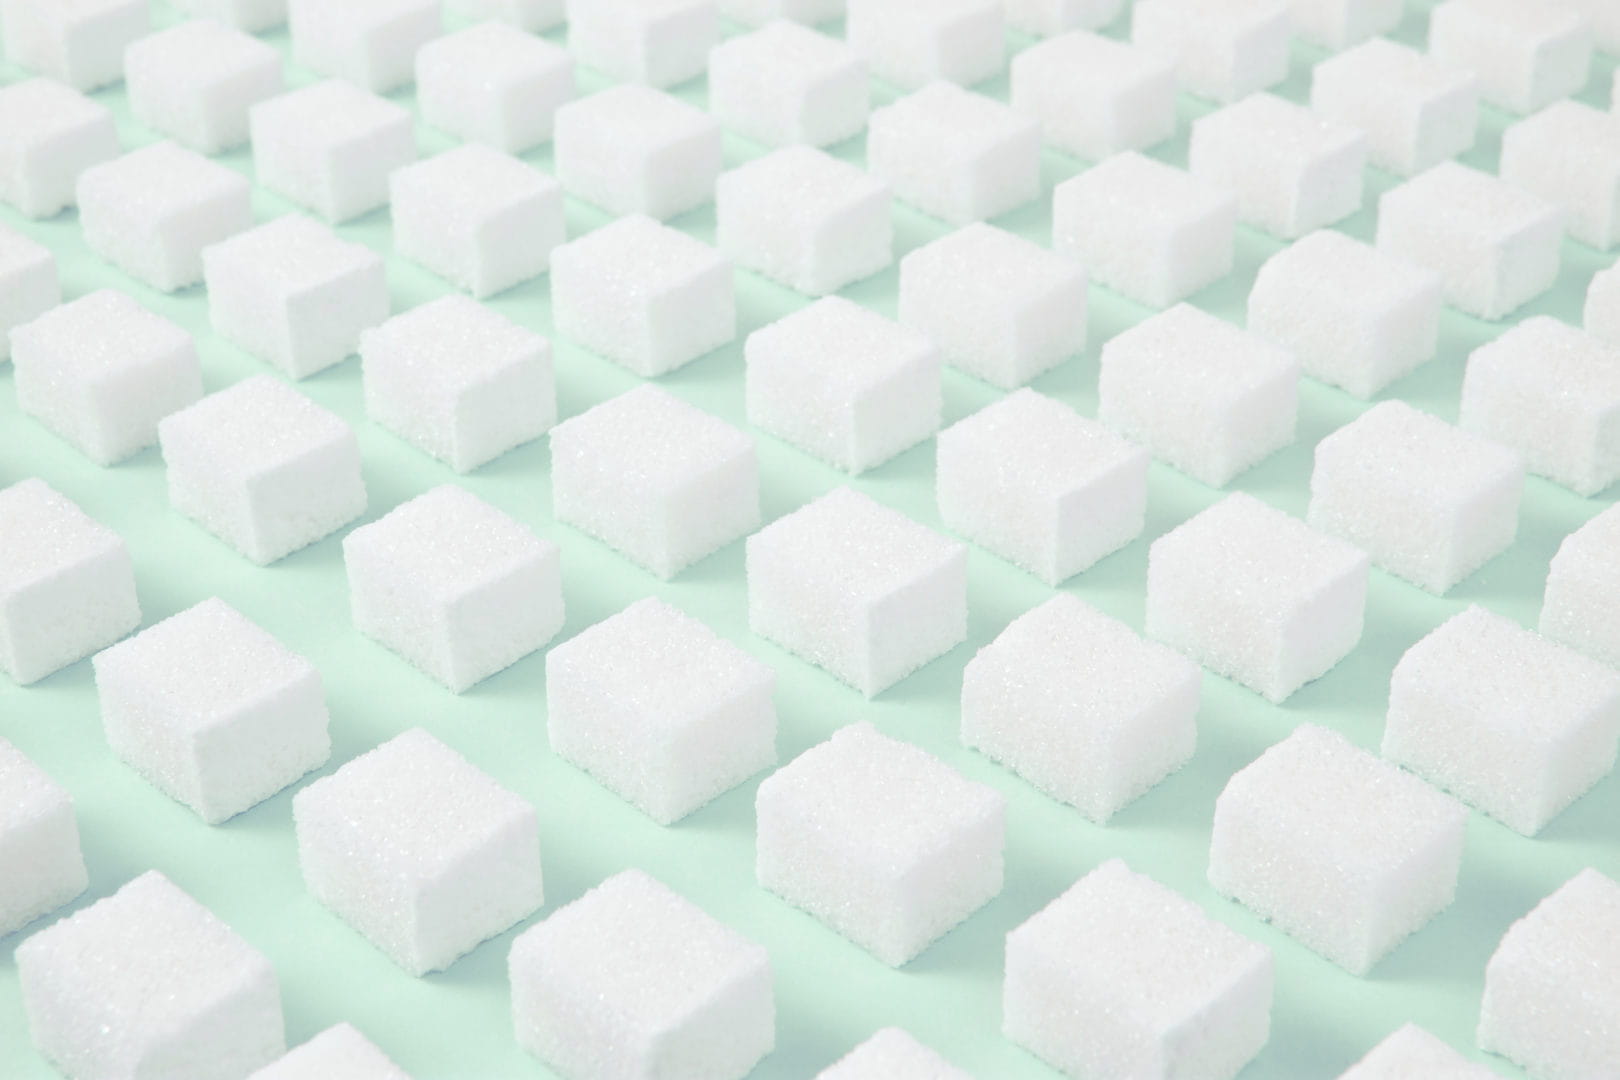 Sugar: The Voice of the Consumer